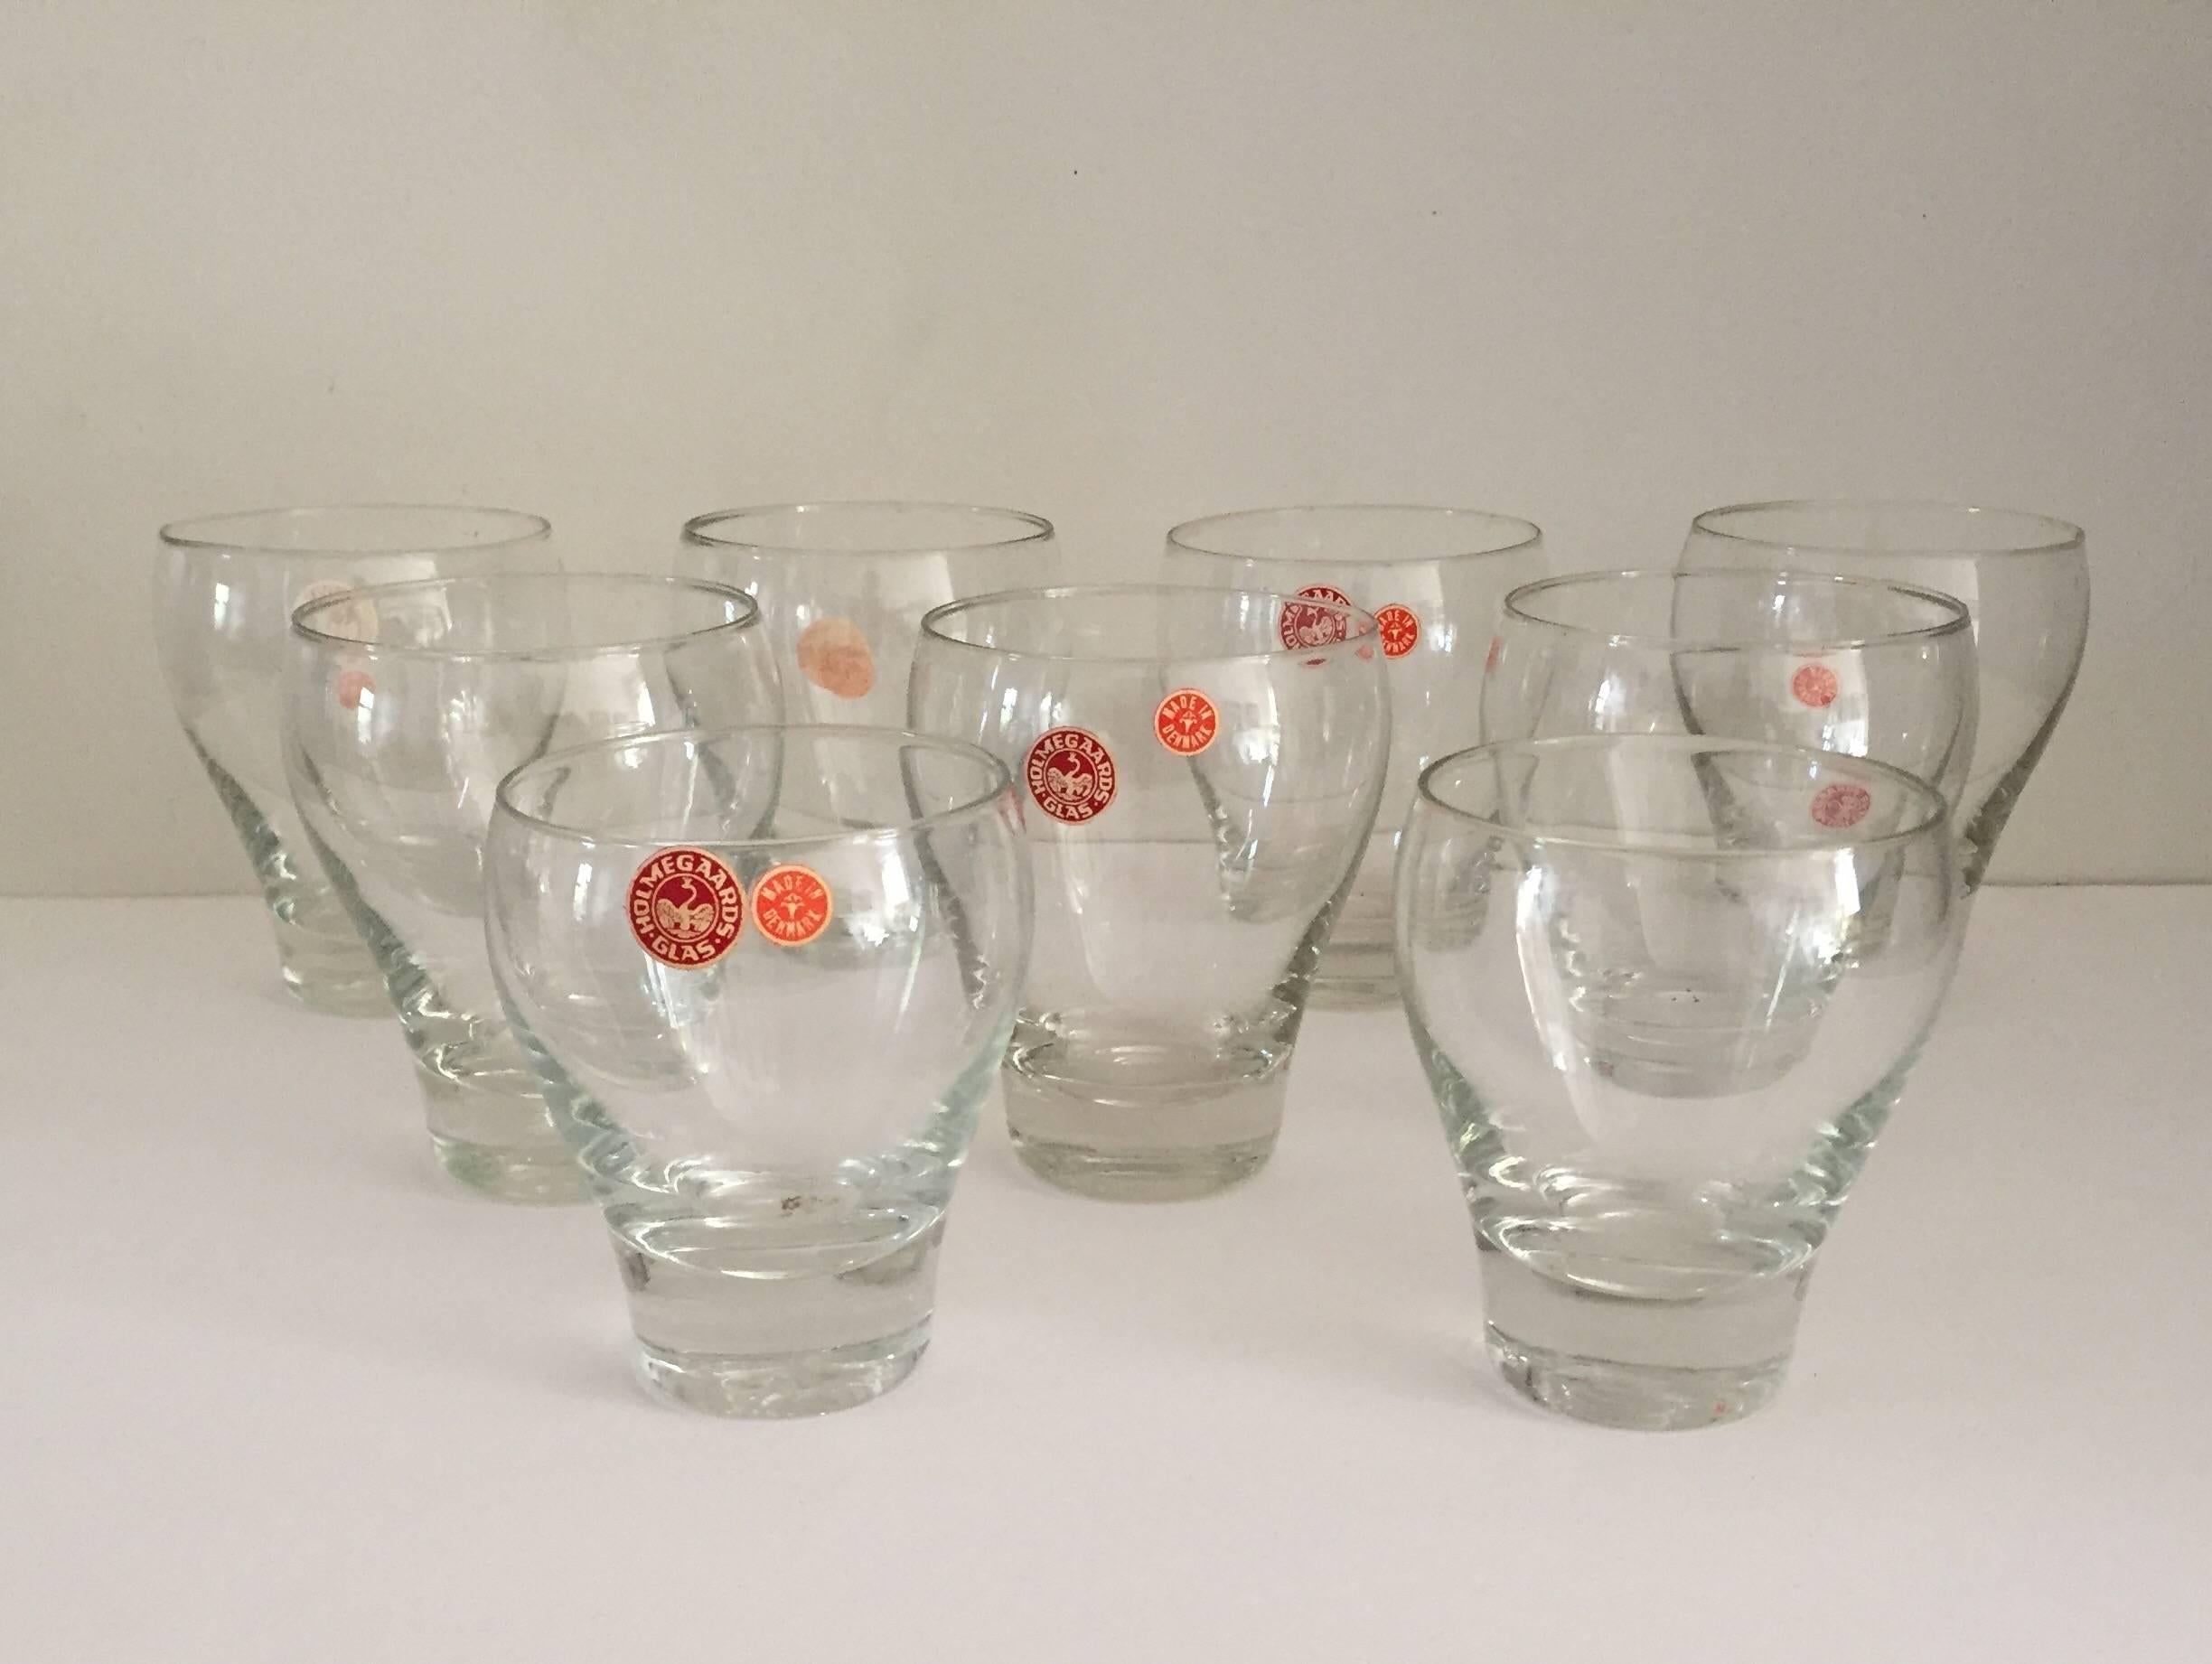 Danish manufacturer Holmegaard is the number one manufacturer of handblown and molded glassware in Denmark. Designer Per Lütken (1916-1998) helped to put the firm on the map of great Mid-Century Modern Danish design, his clean lines marking a